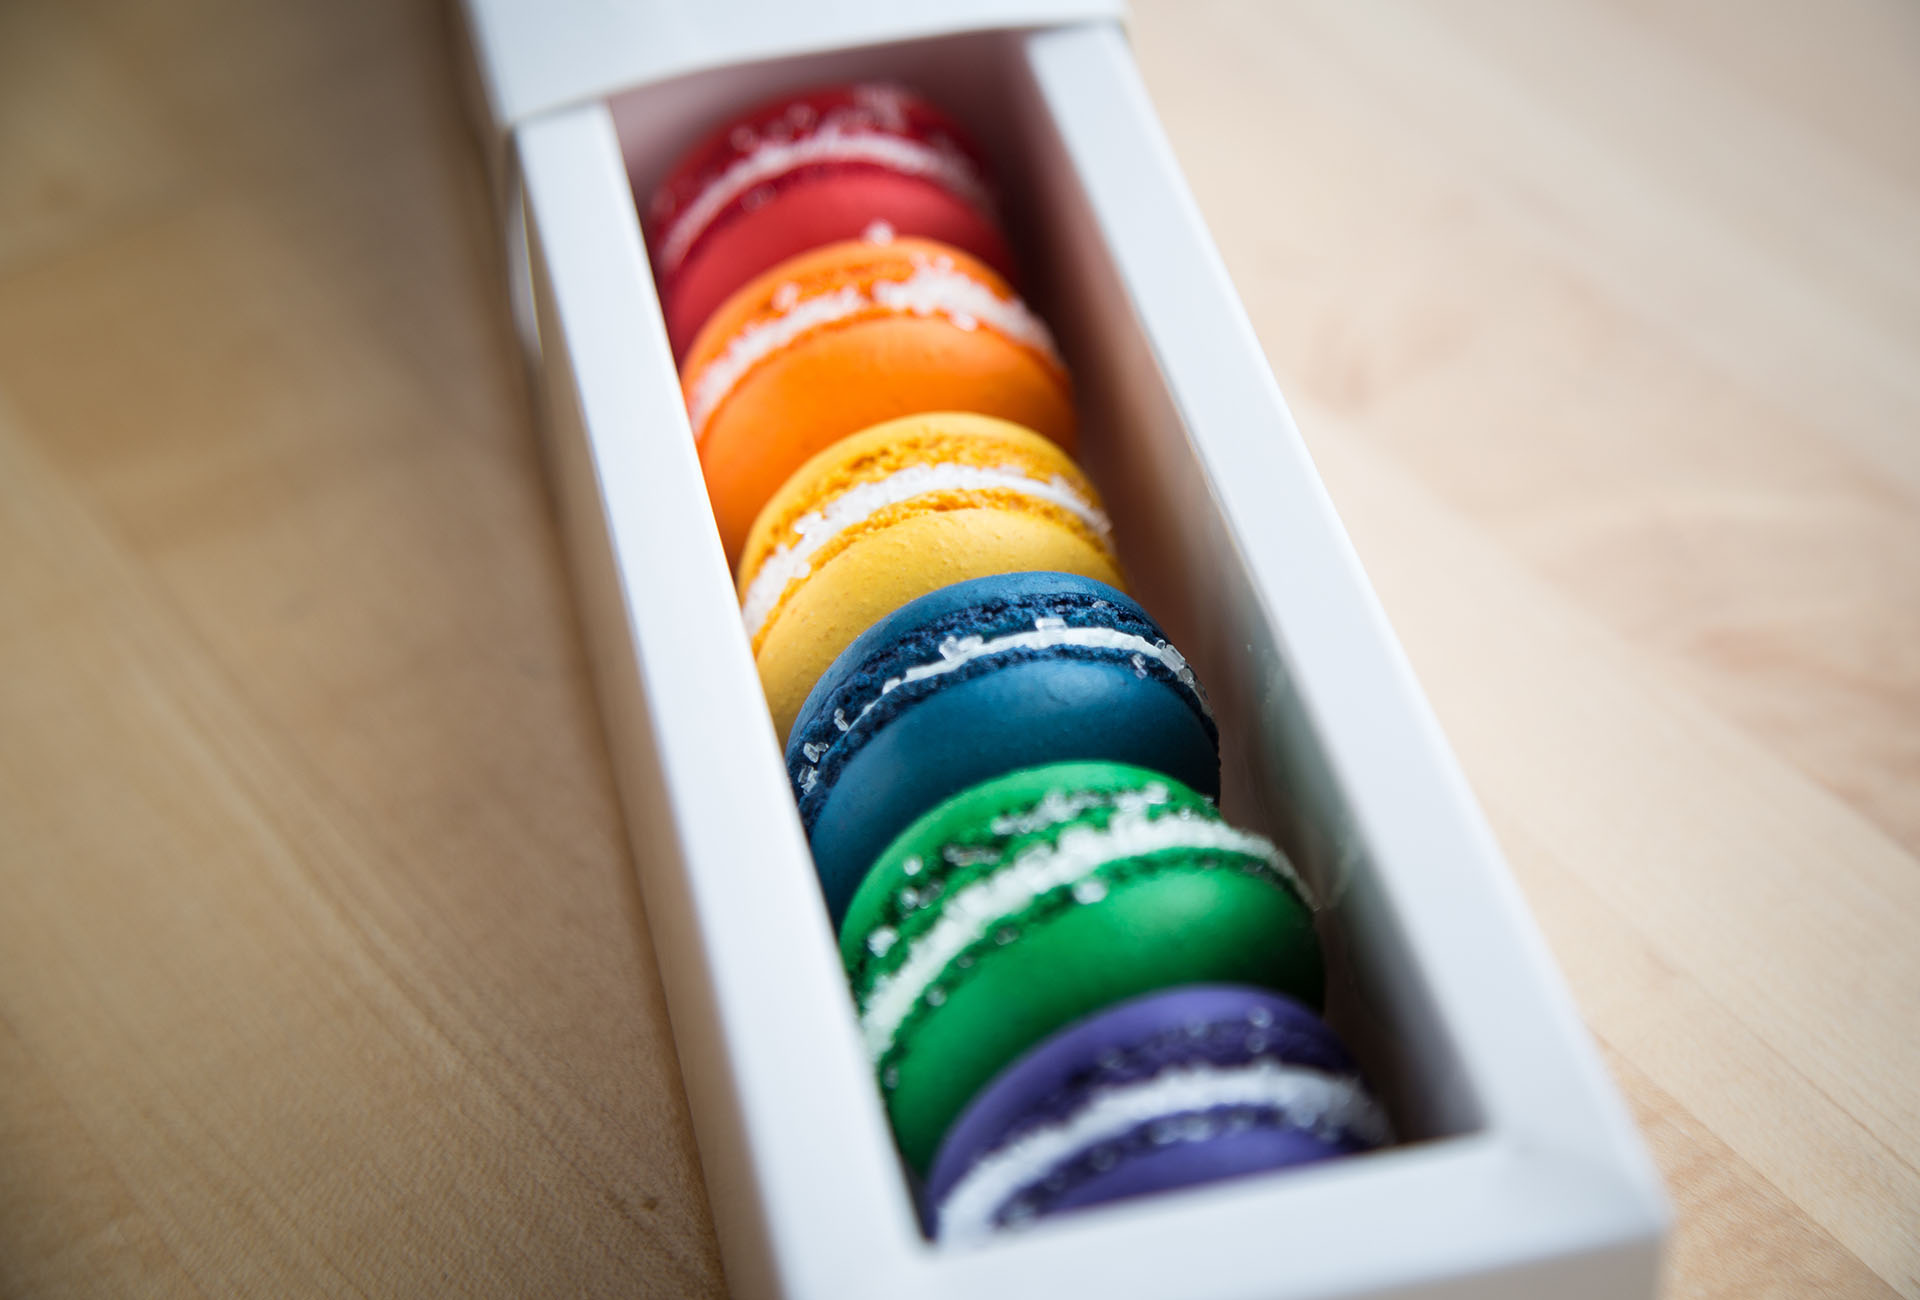 The Pride-themed Macarons are available to order online and come in a case of six.